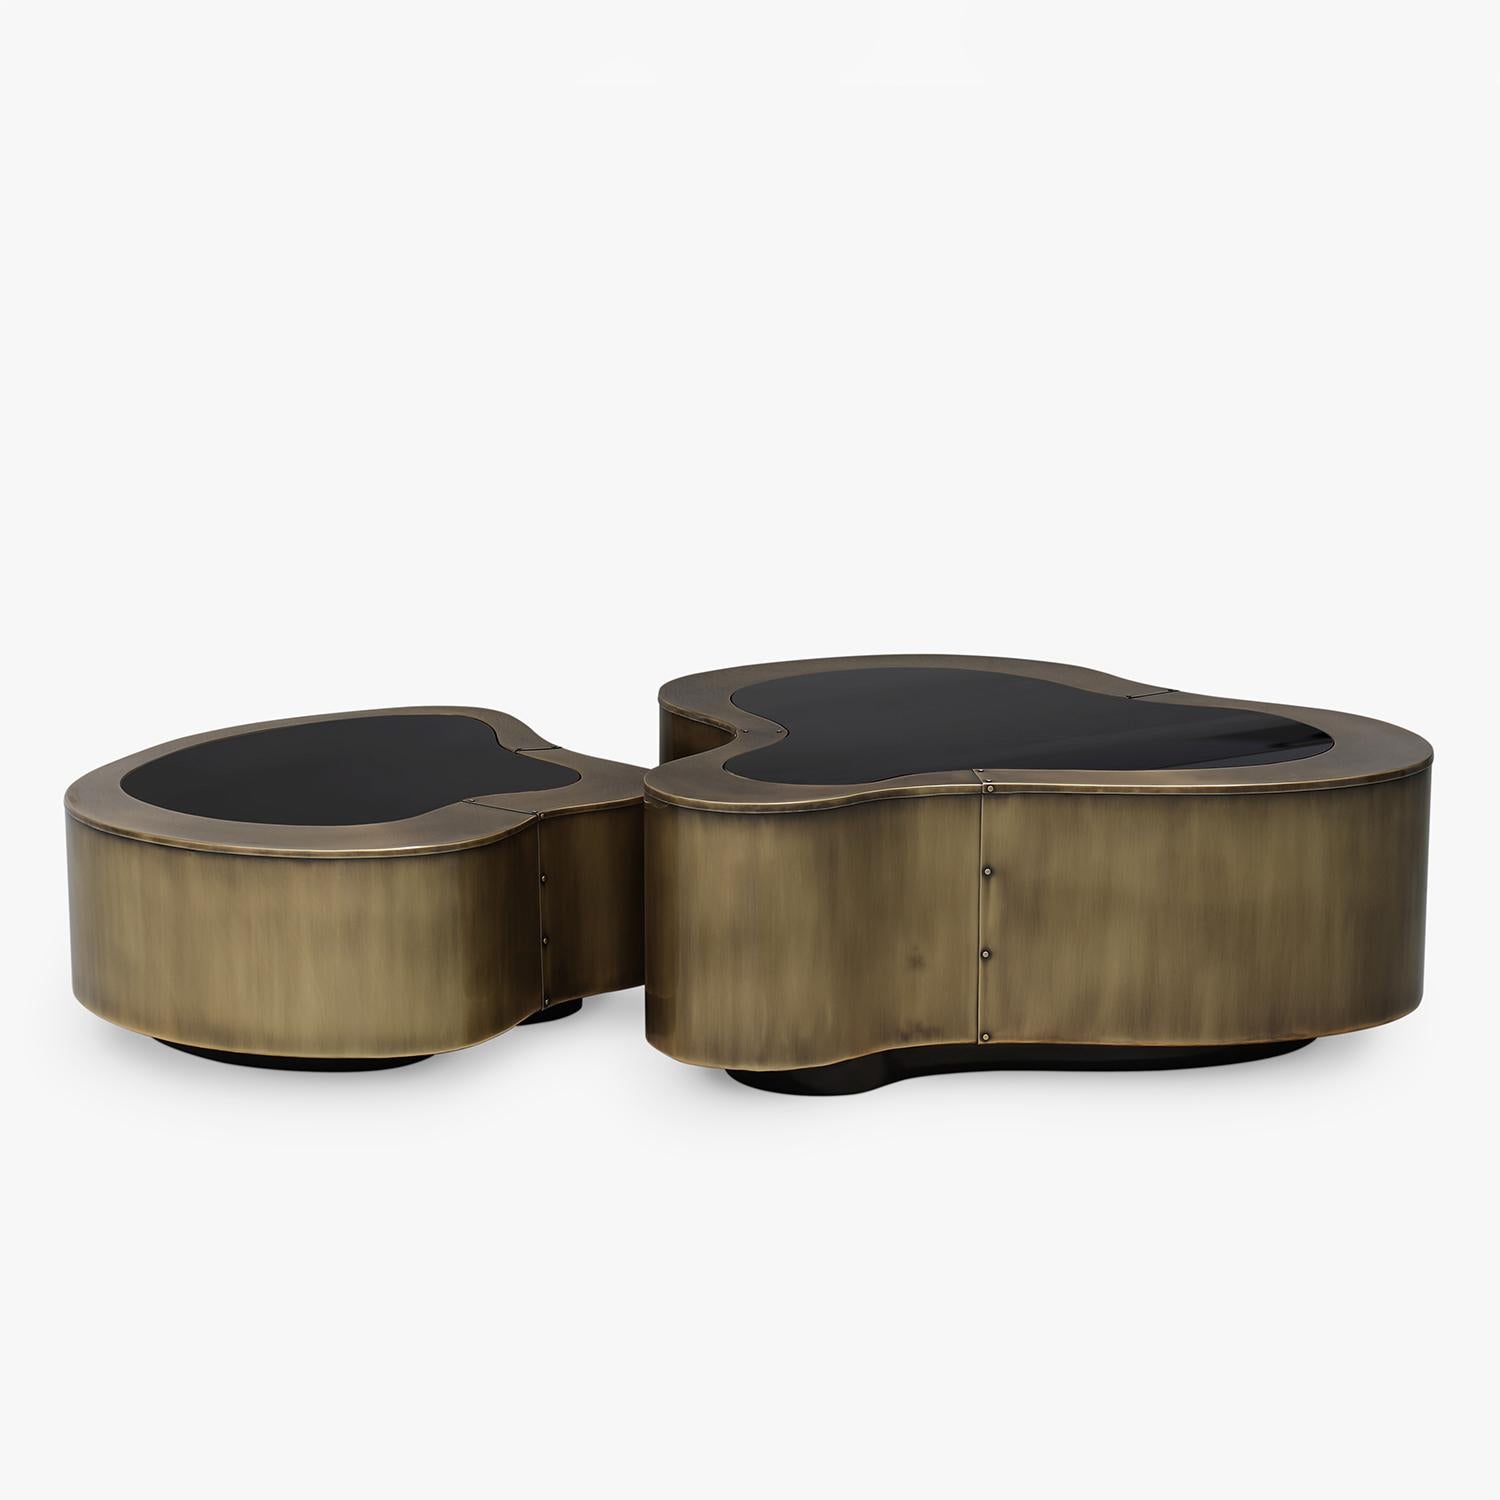 Coffee Table Dalia Antique Brass Set of 2 with wooden structure 
covered with handcrafted solid brass in antique finish. With curved 
black glass top. With black lacquered base varnished finish.
Also available in other finishes on request.
Set